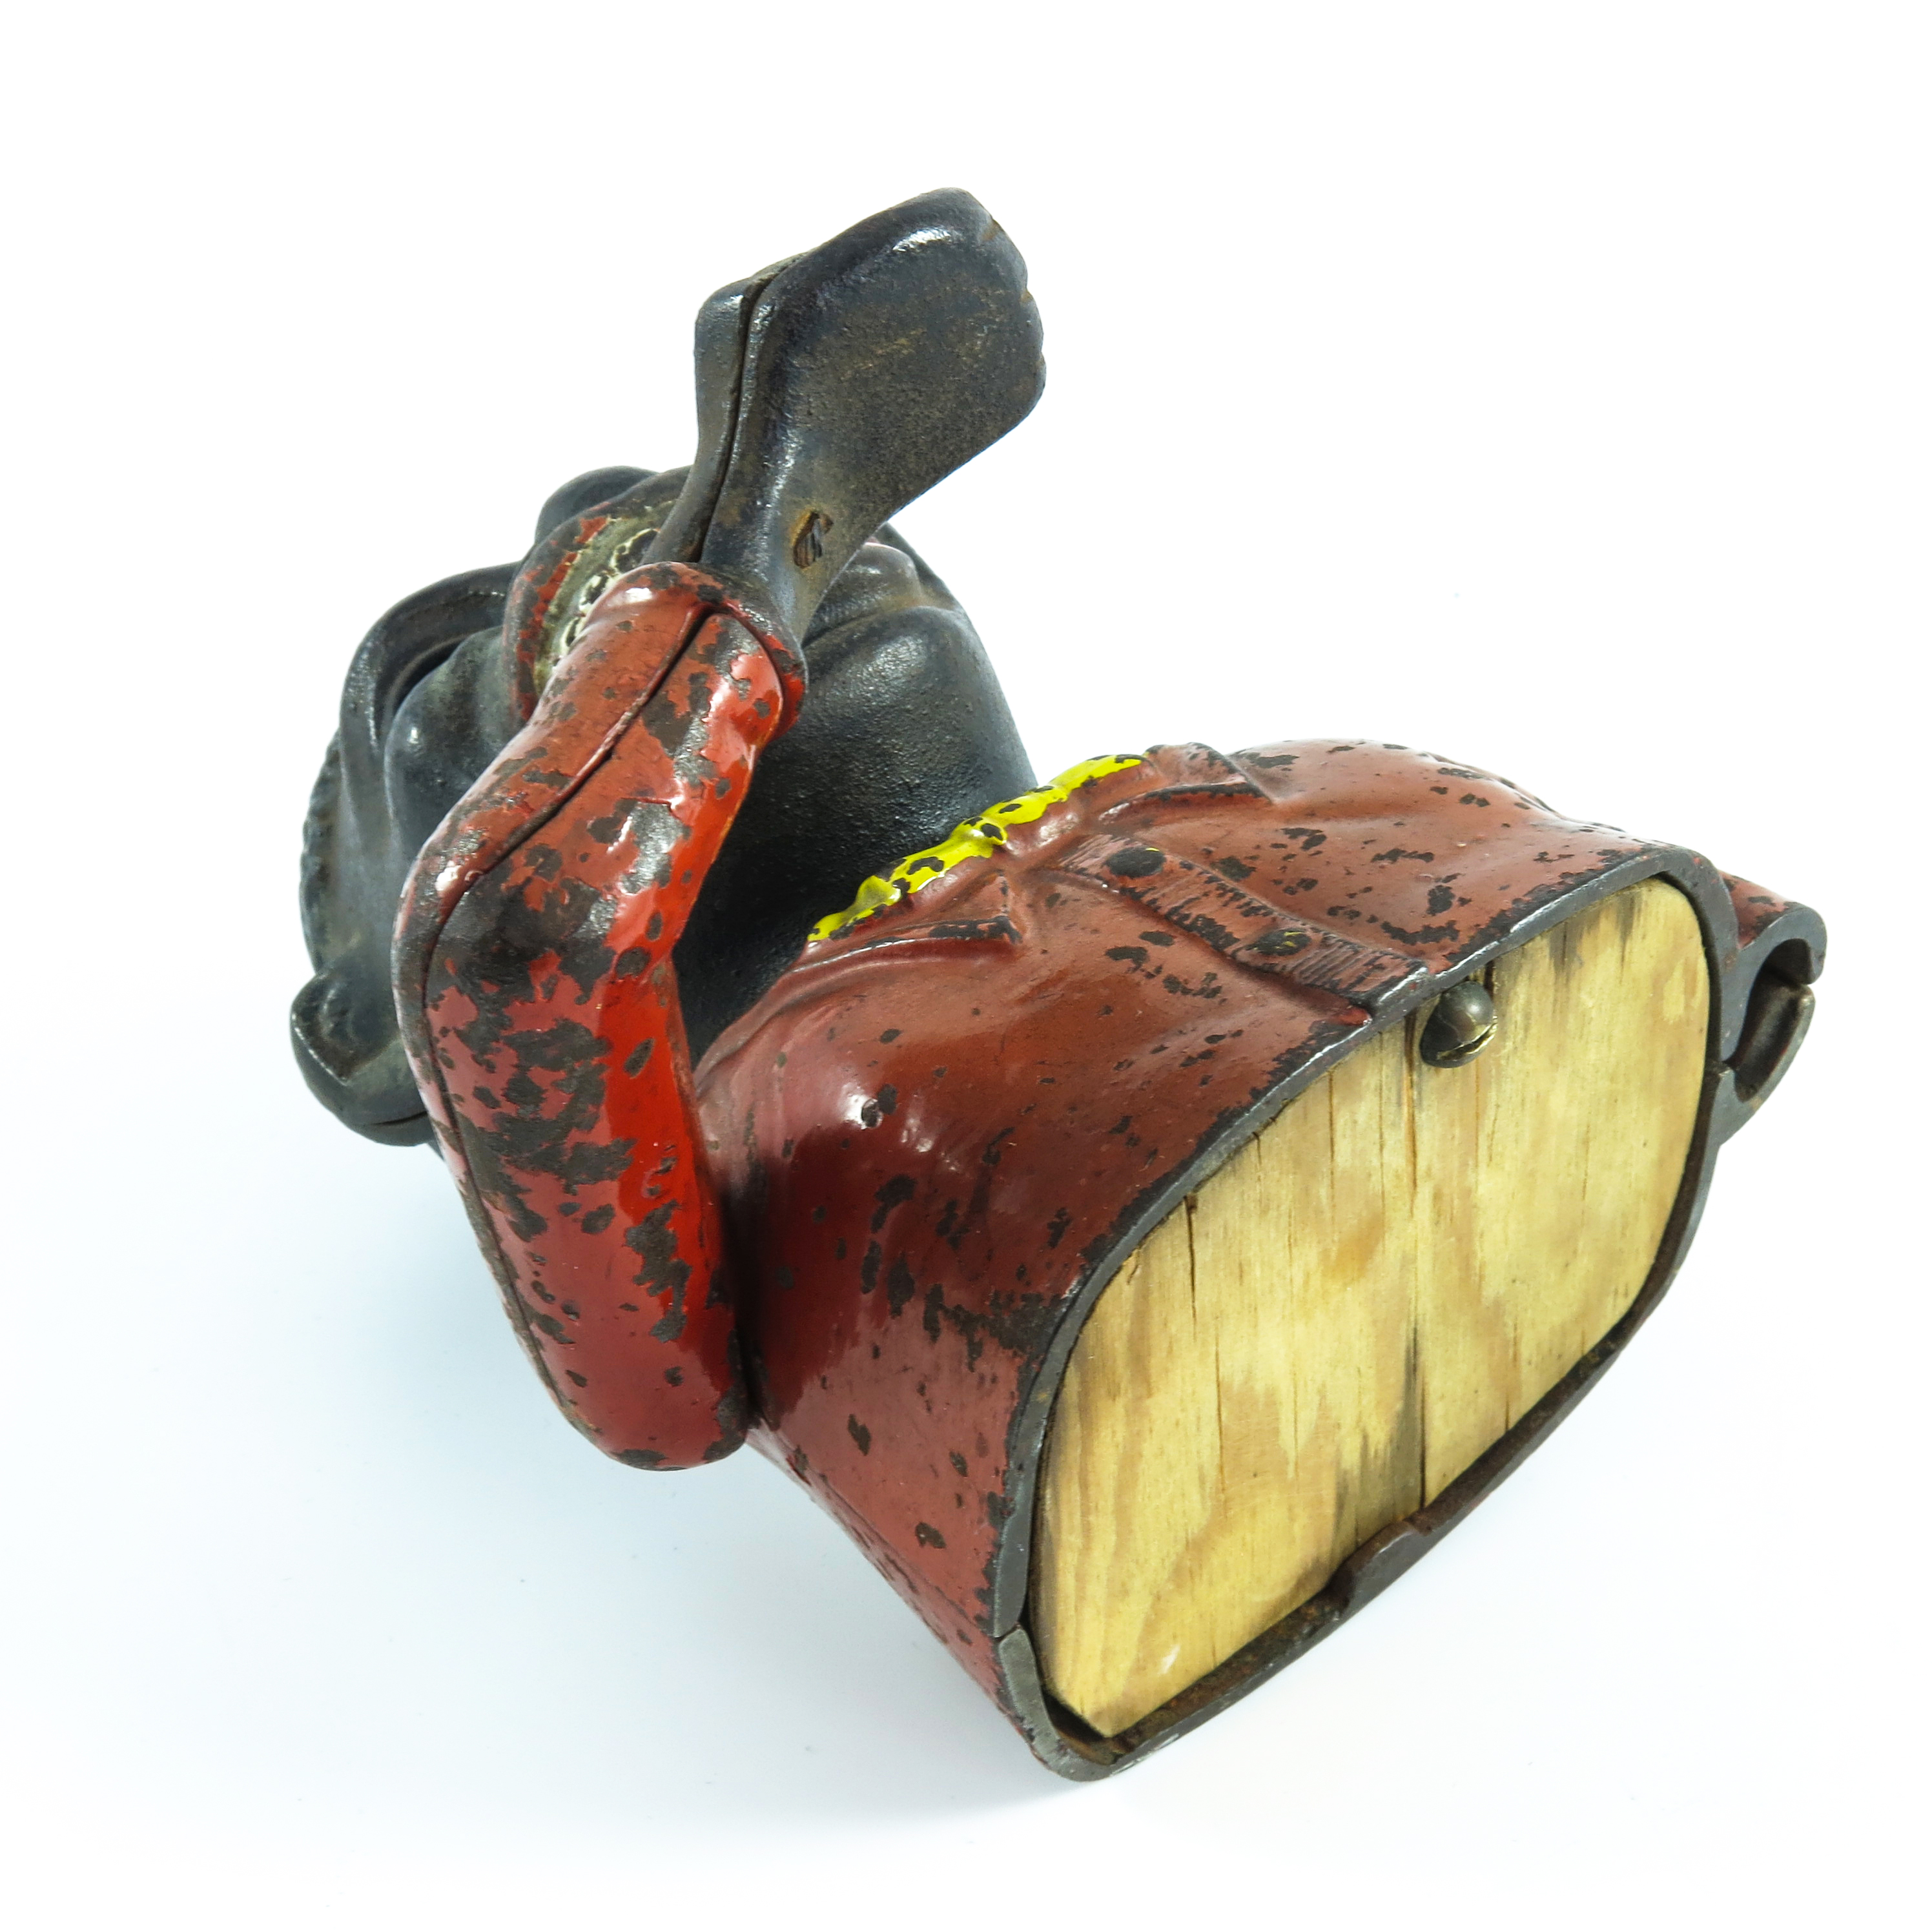 'JOLLY NIGGER' ORIGINAL CAST IRON MECHANICAL MONEY BOX, RED POLYCHROME DECORATION WITH YELLOW BOW - Image 6 of 6